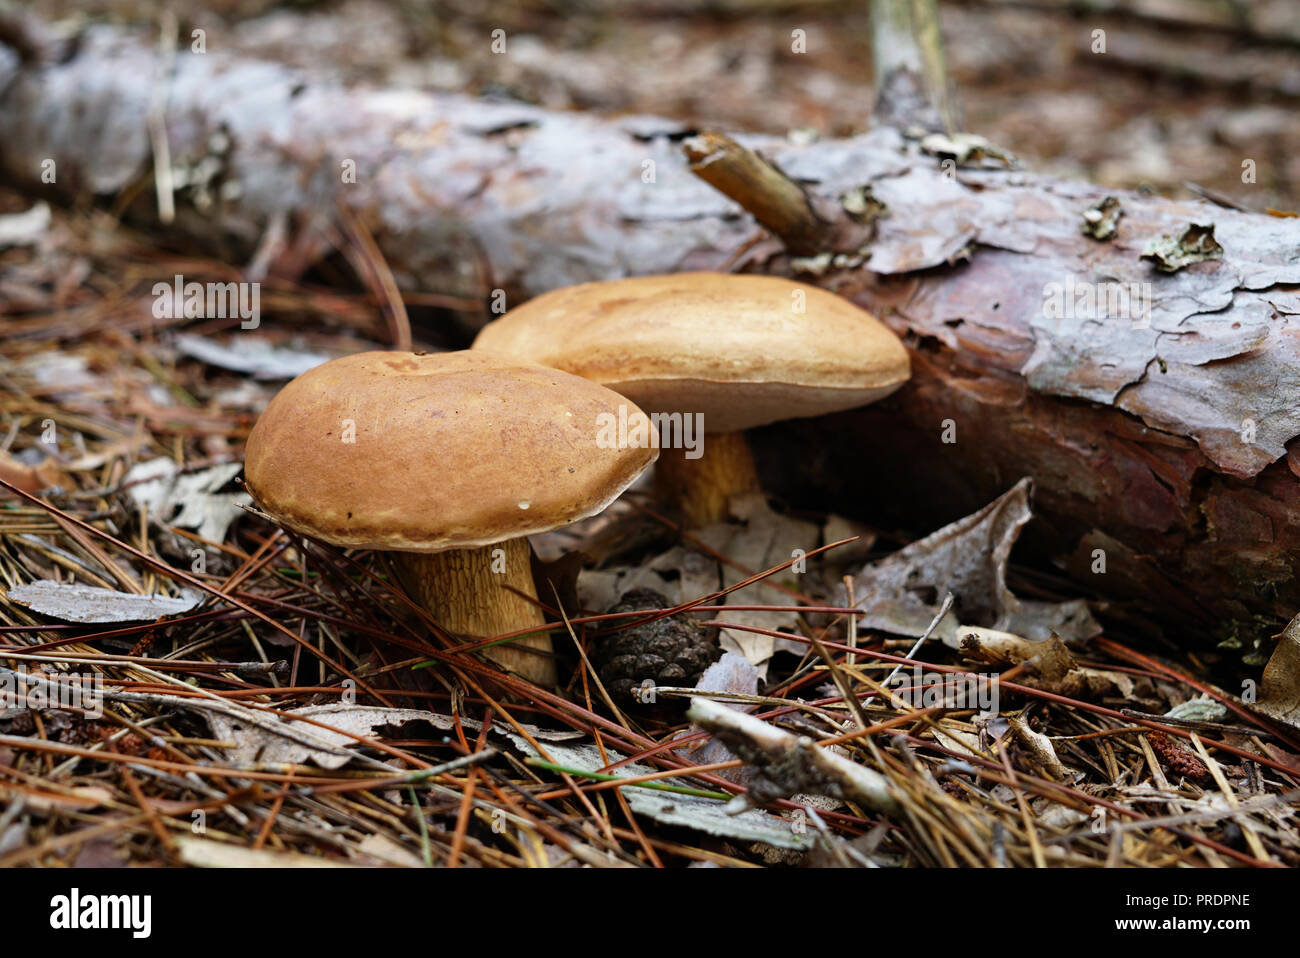 Two mushrooms with a brown hat grew next to the fallen log. Mushrooms are in the forest surrounded by foliage and spruce needles. Name of mushroom Lex Stock Photo